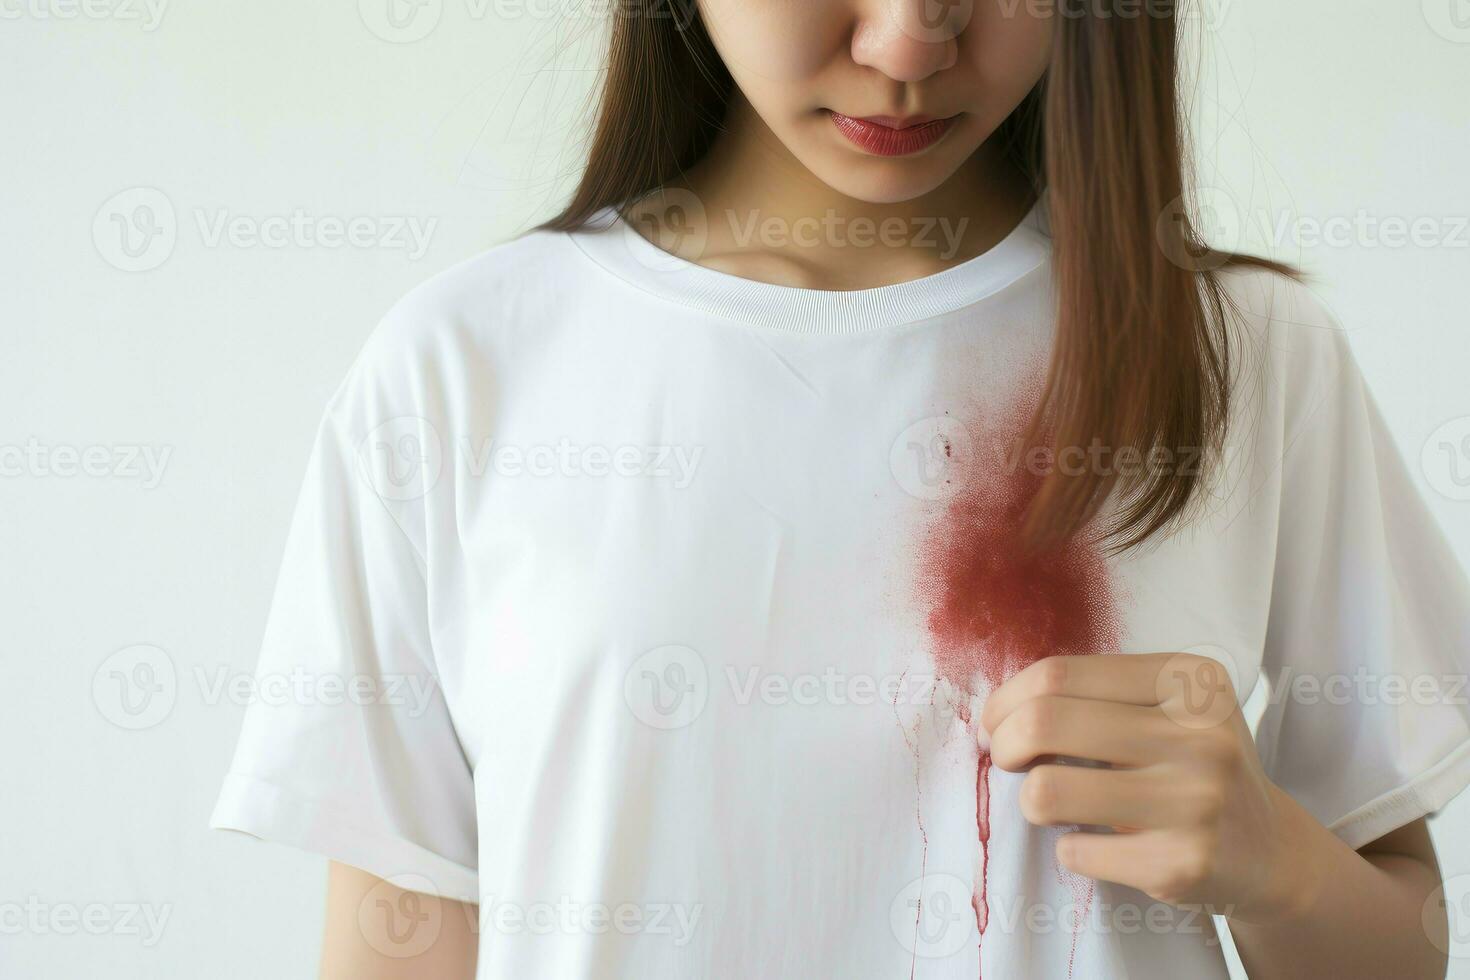 Woman showing stain from sauce on her shirt eliminate. Generate Ai photo